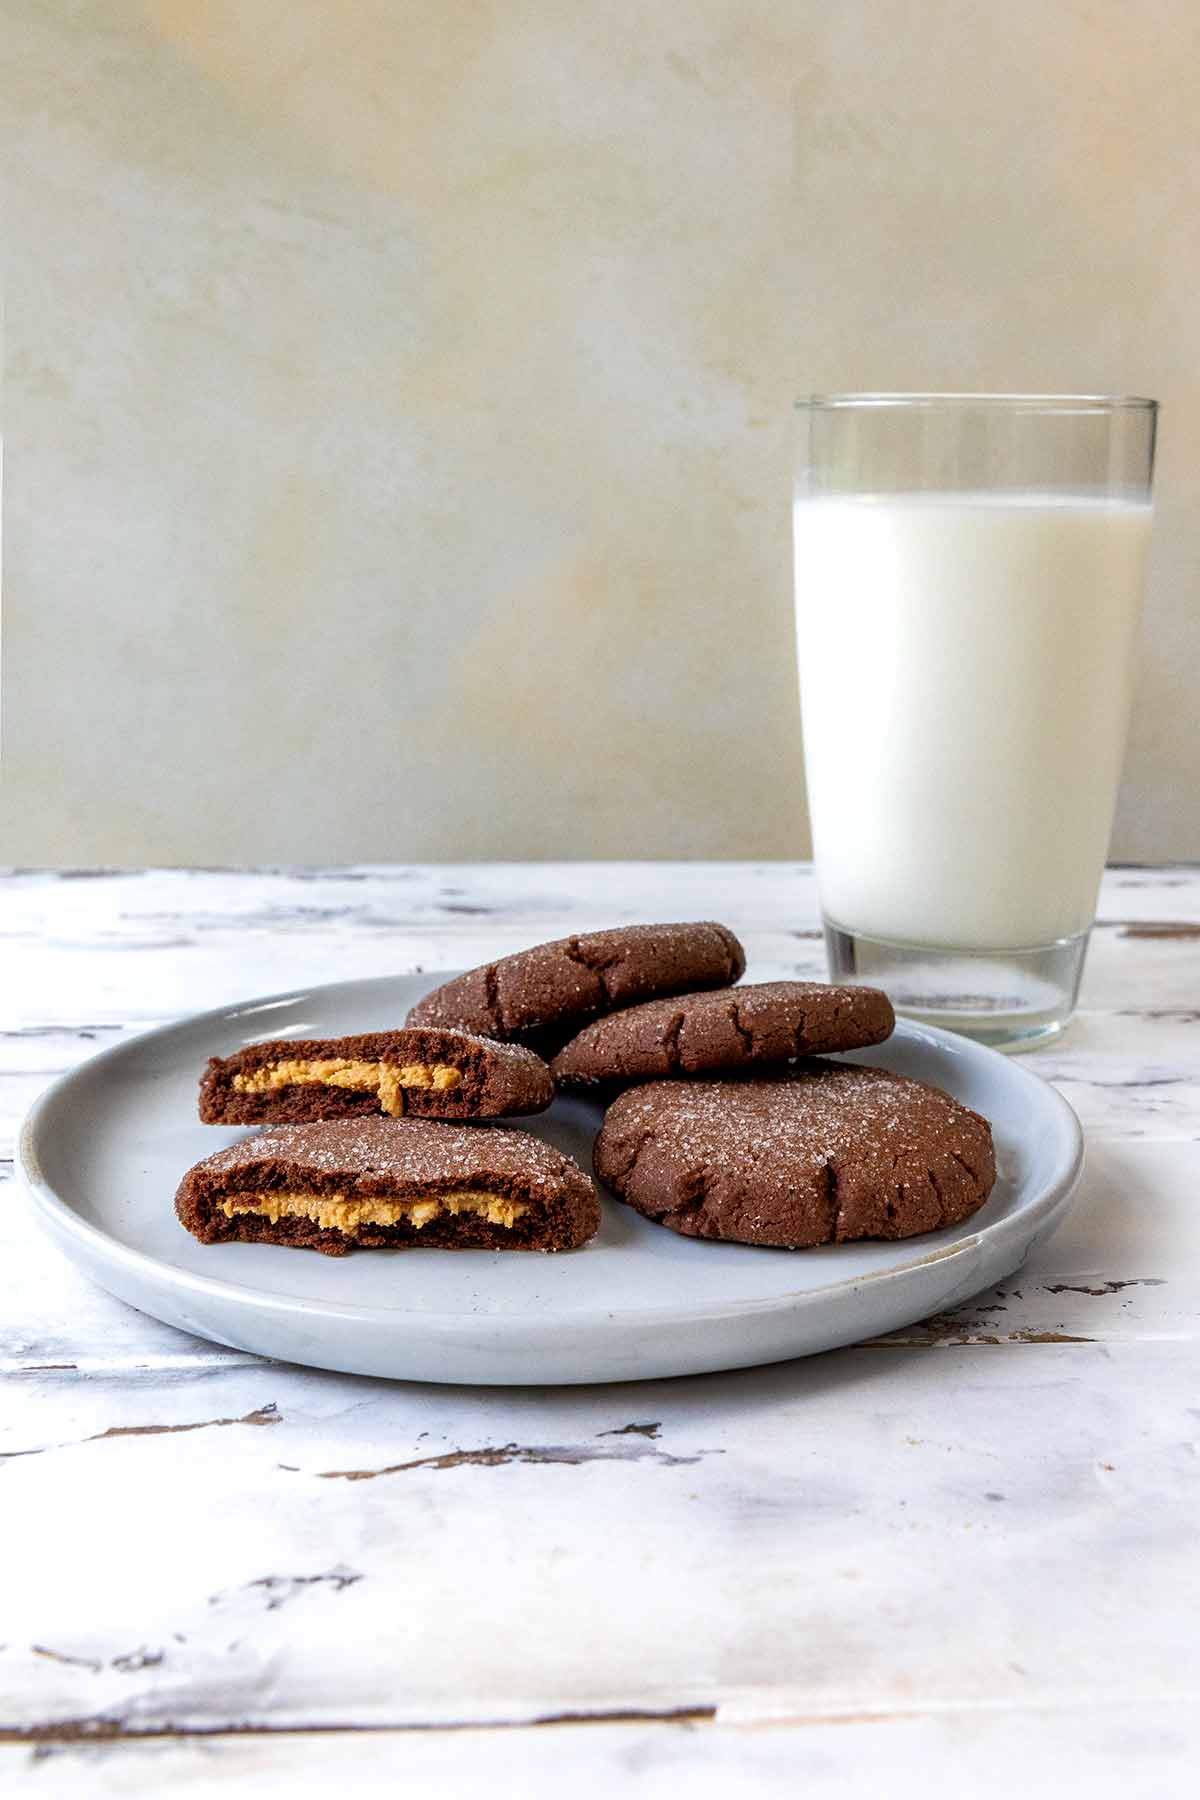 Chocolate peanut butter cookies in a stack, the top one broken in half and a glass of milk on a worn white background.